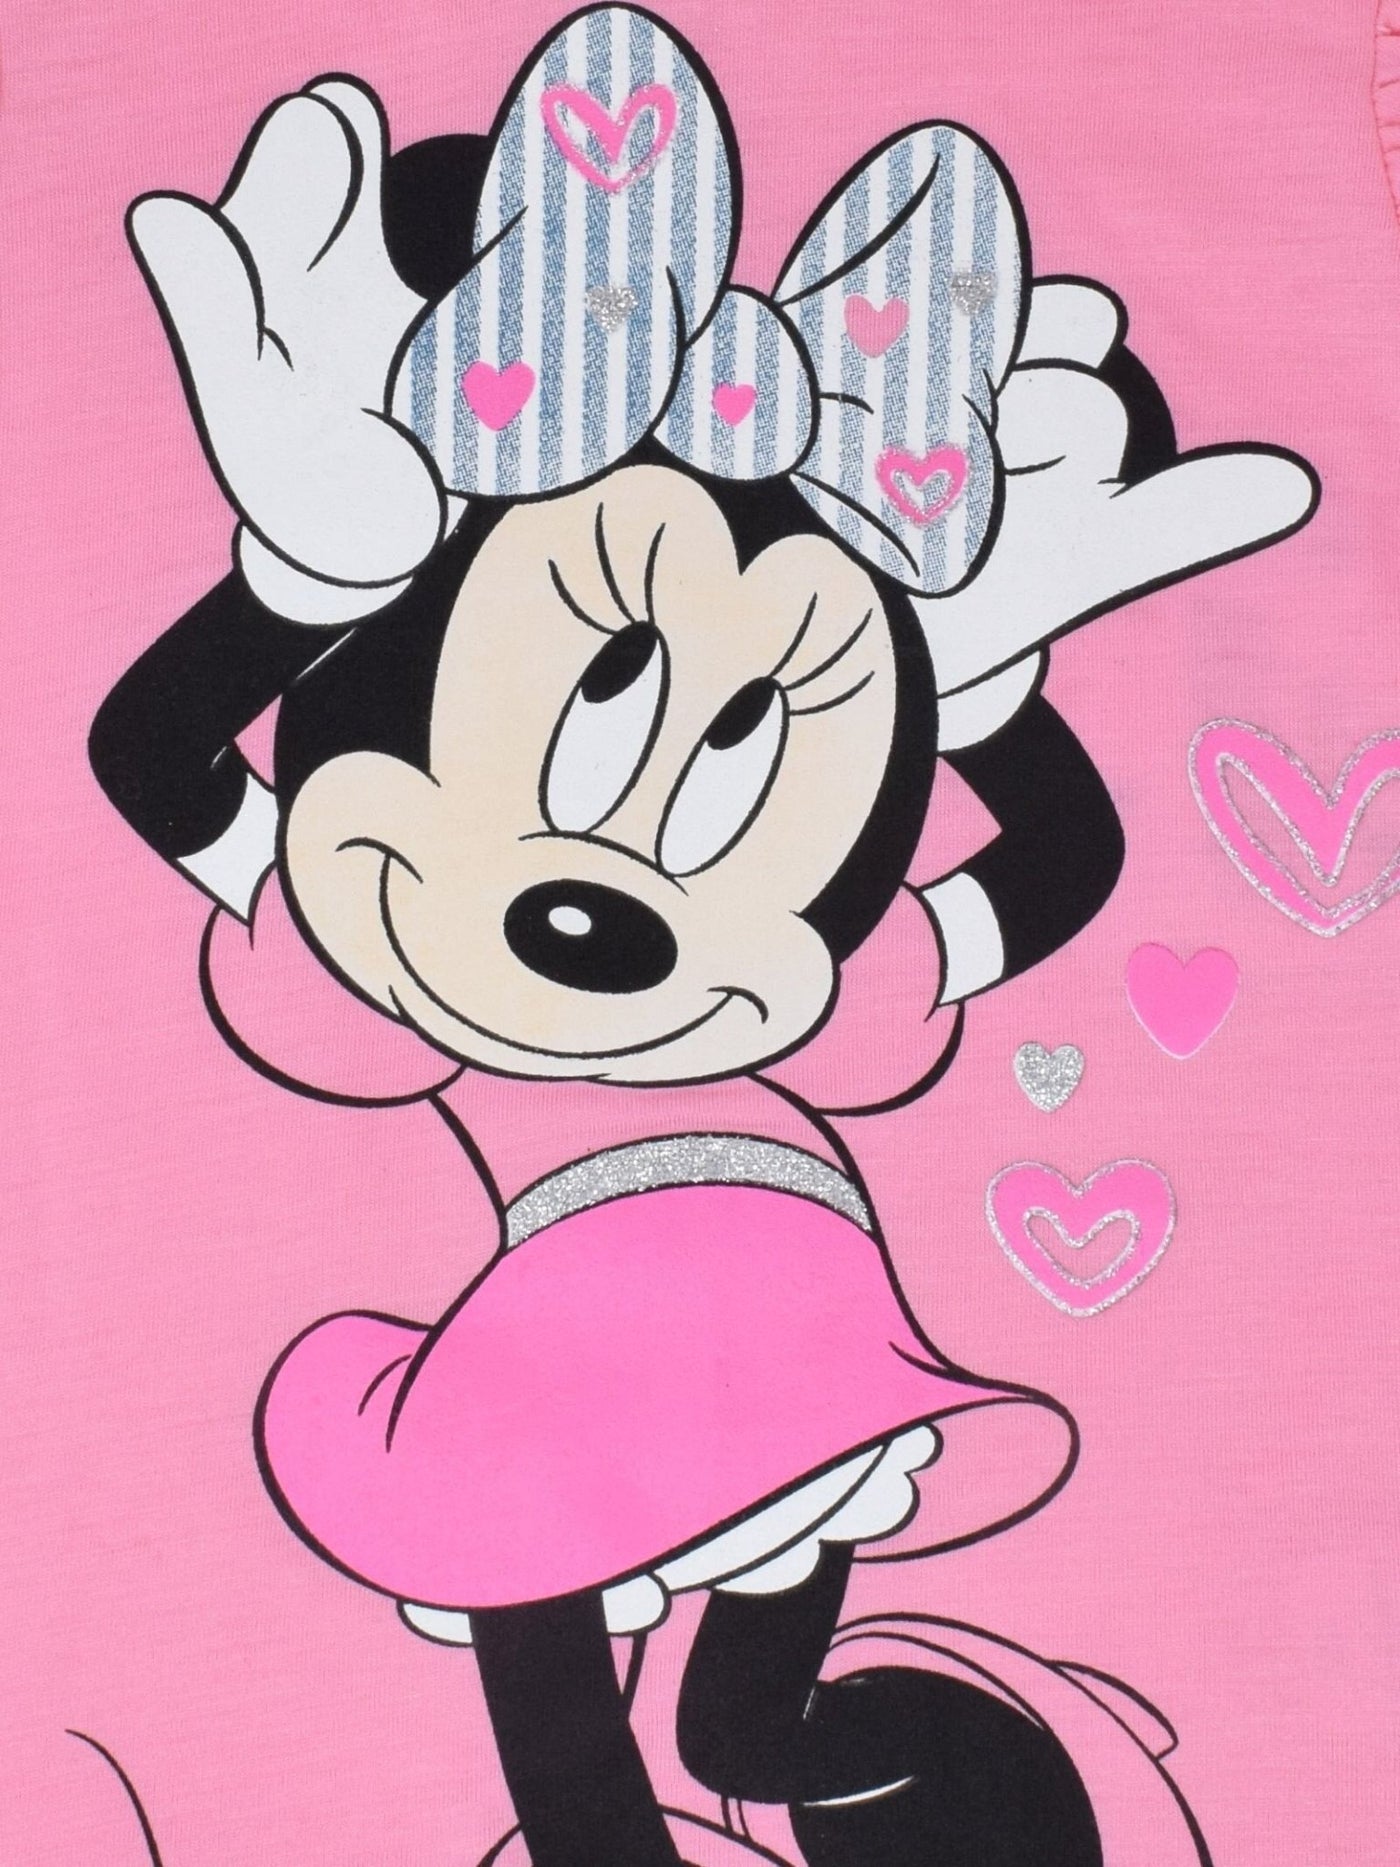 Disney Minnie Mouse T-Shirt and Shorts Outfit Set - imagikids